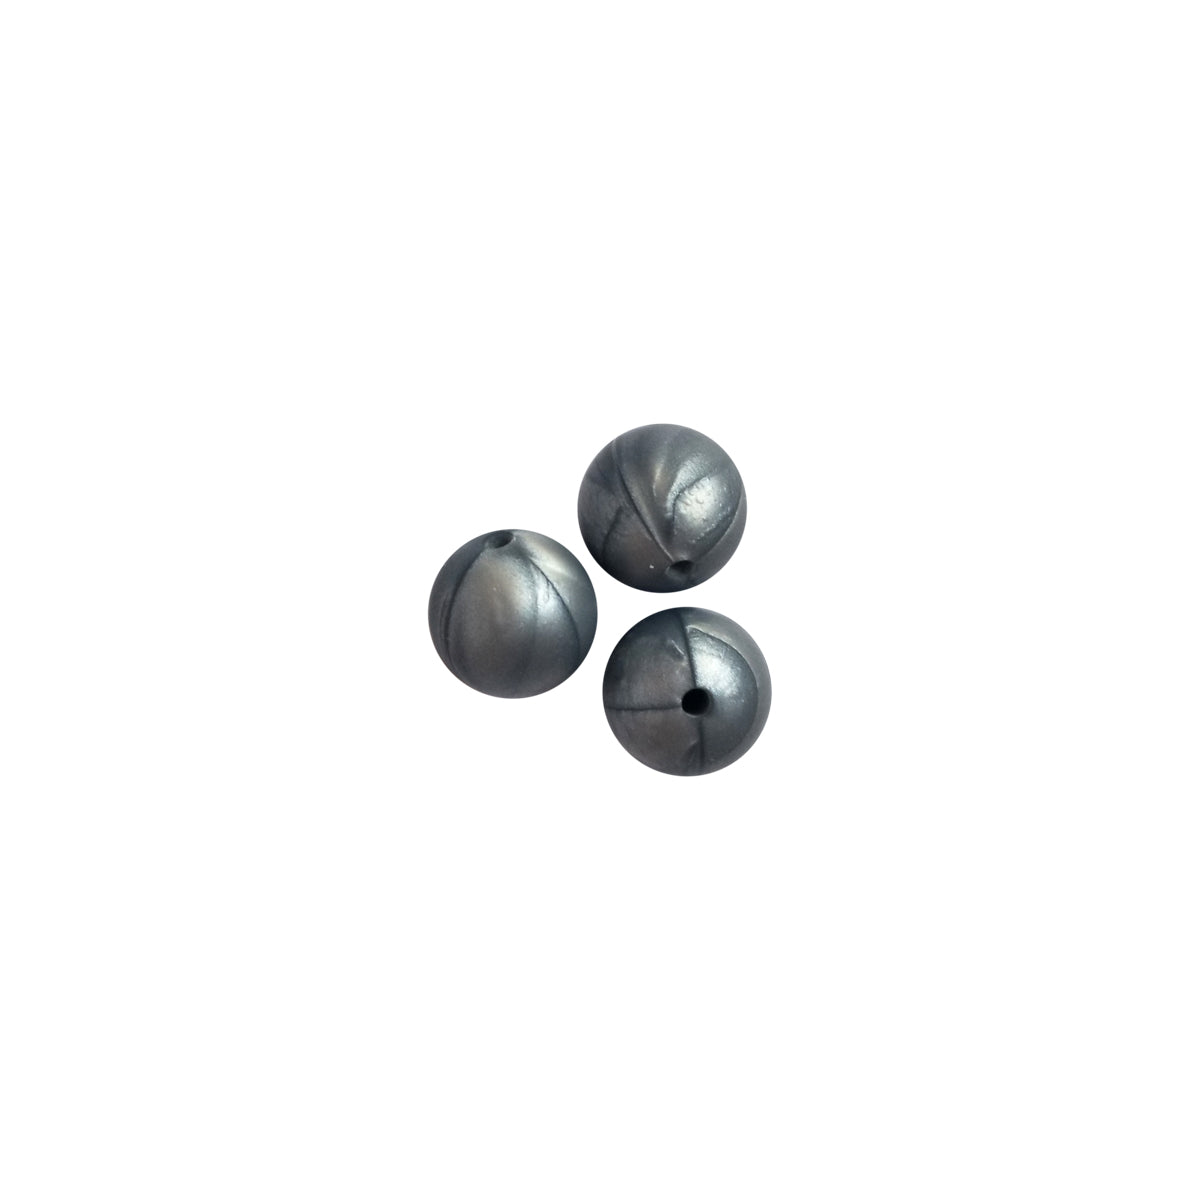 15mm metallic silver round silicone beads